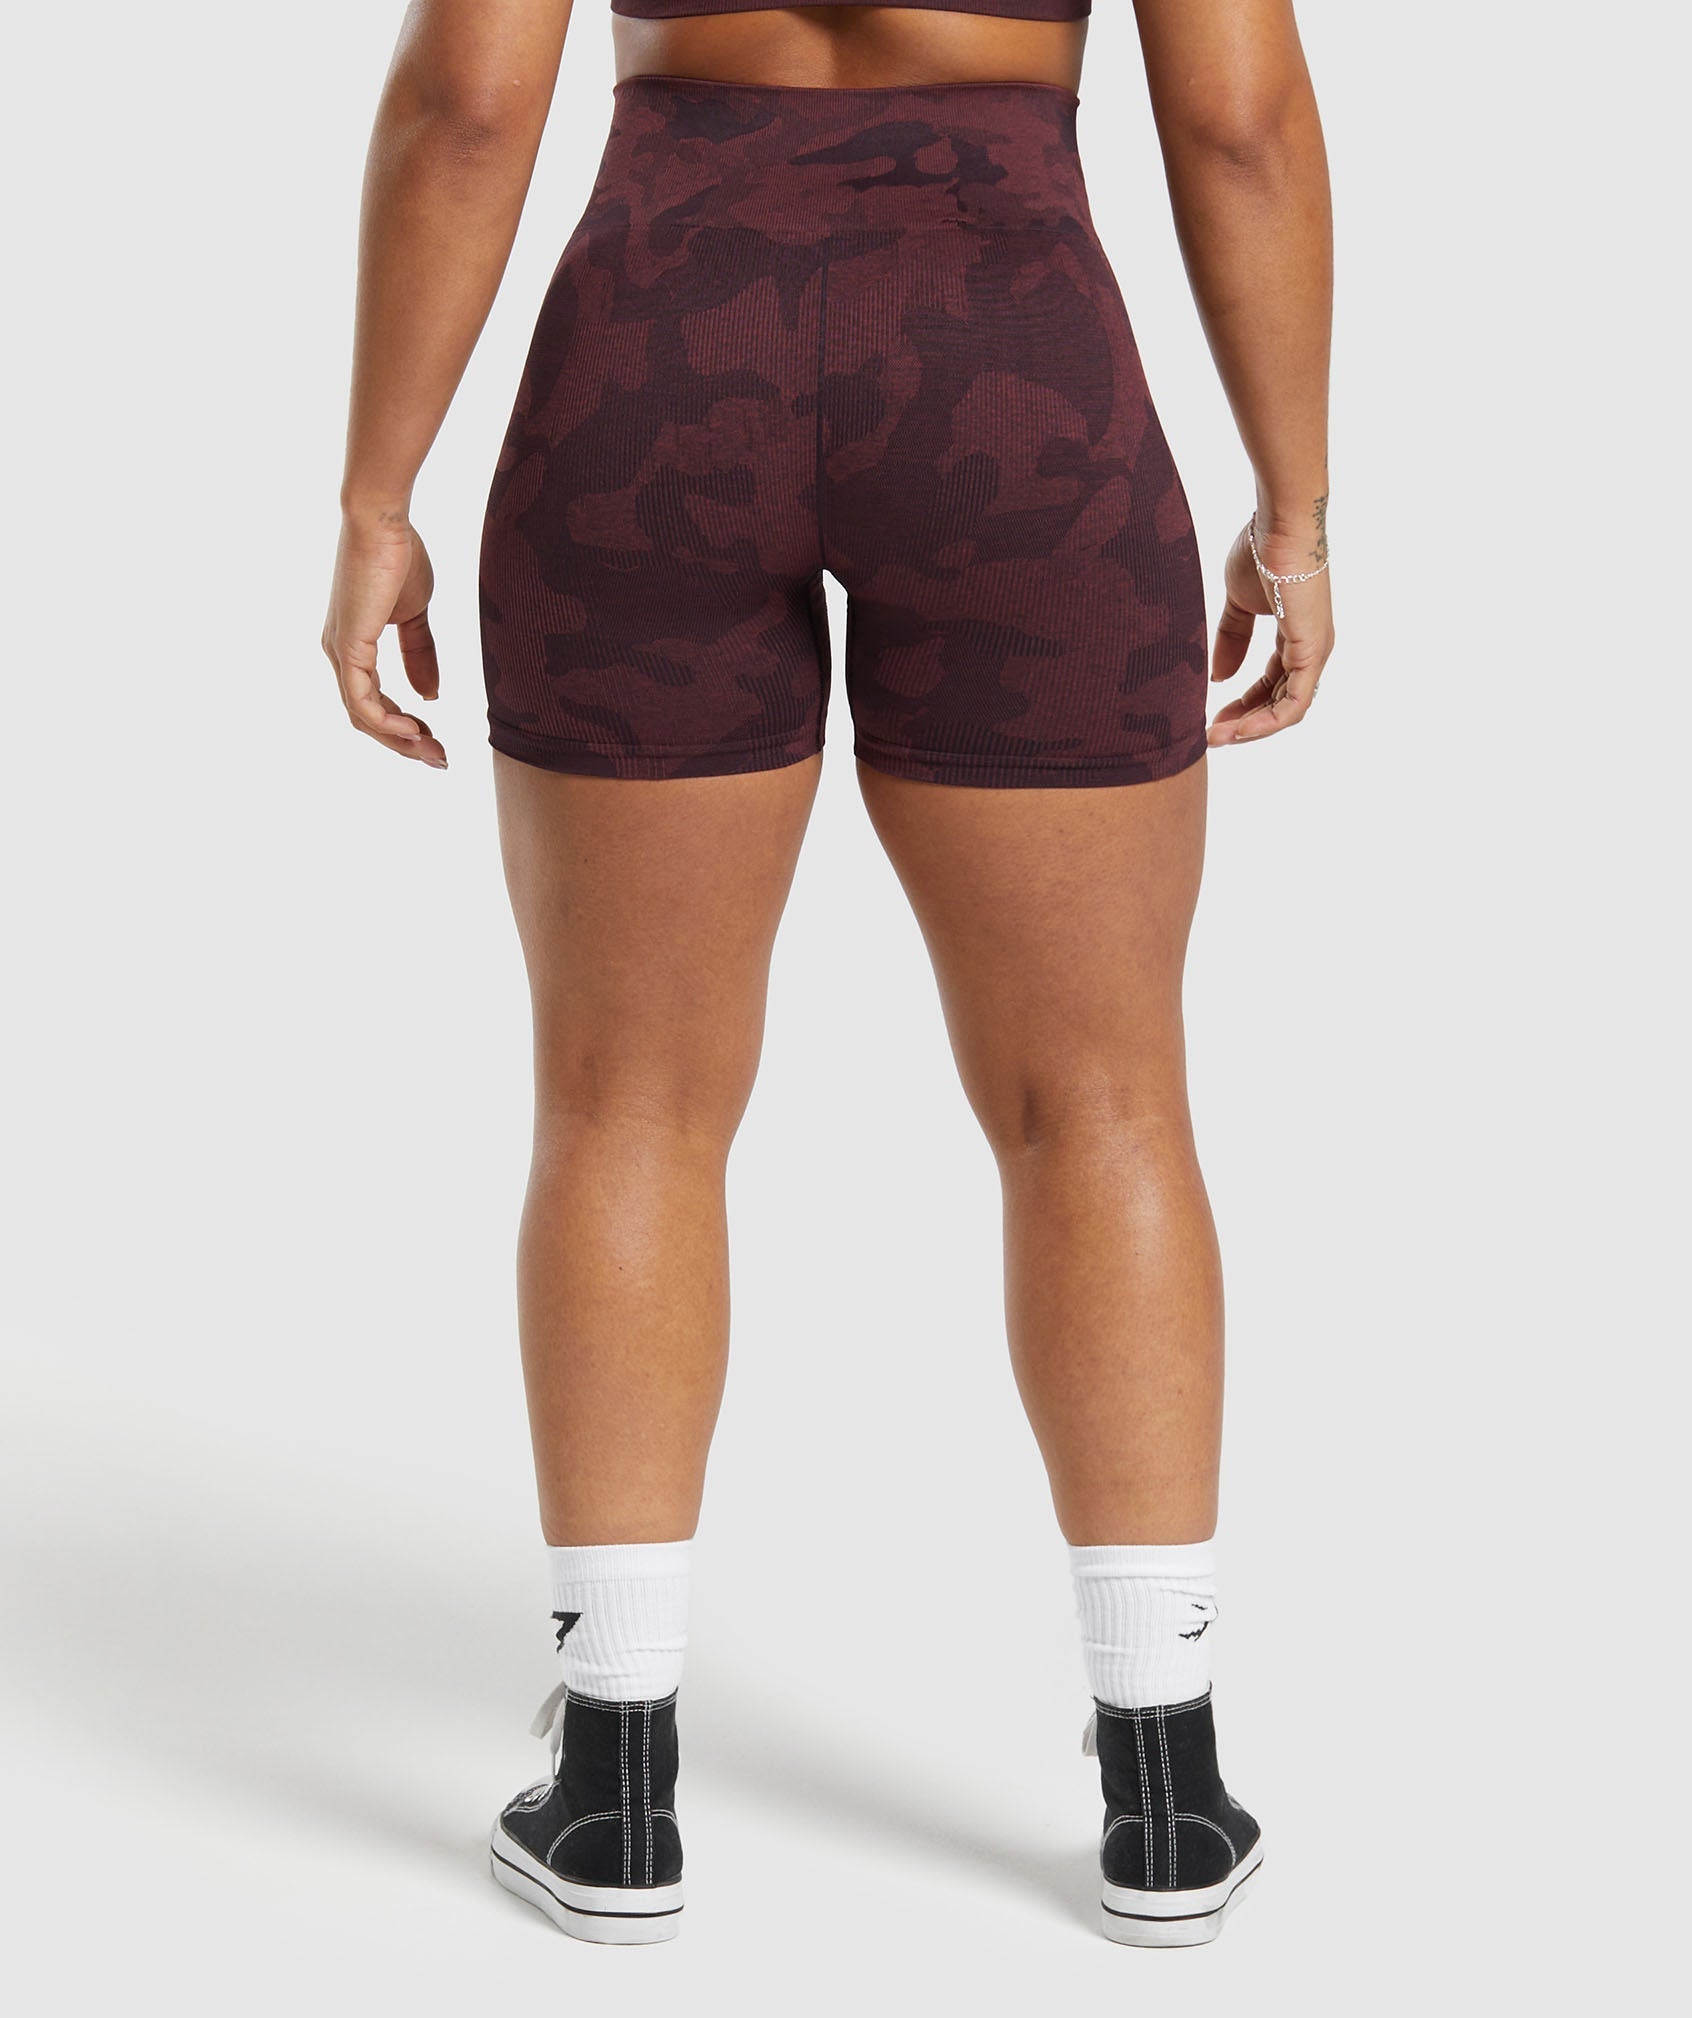 Adapt Camo Seamless Shorts in Plum Brown/Burgundy Brown - view 2